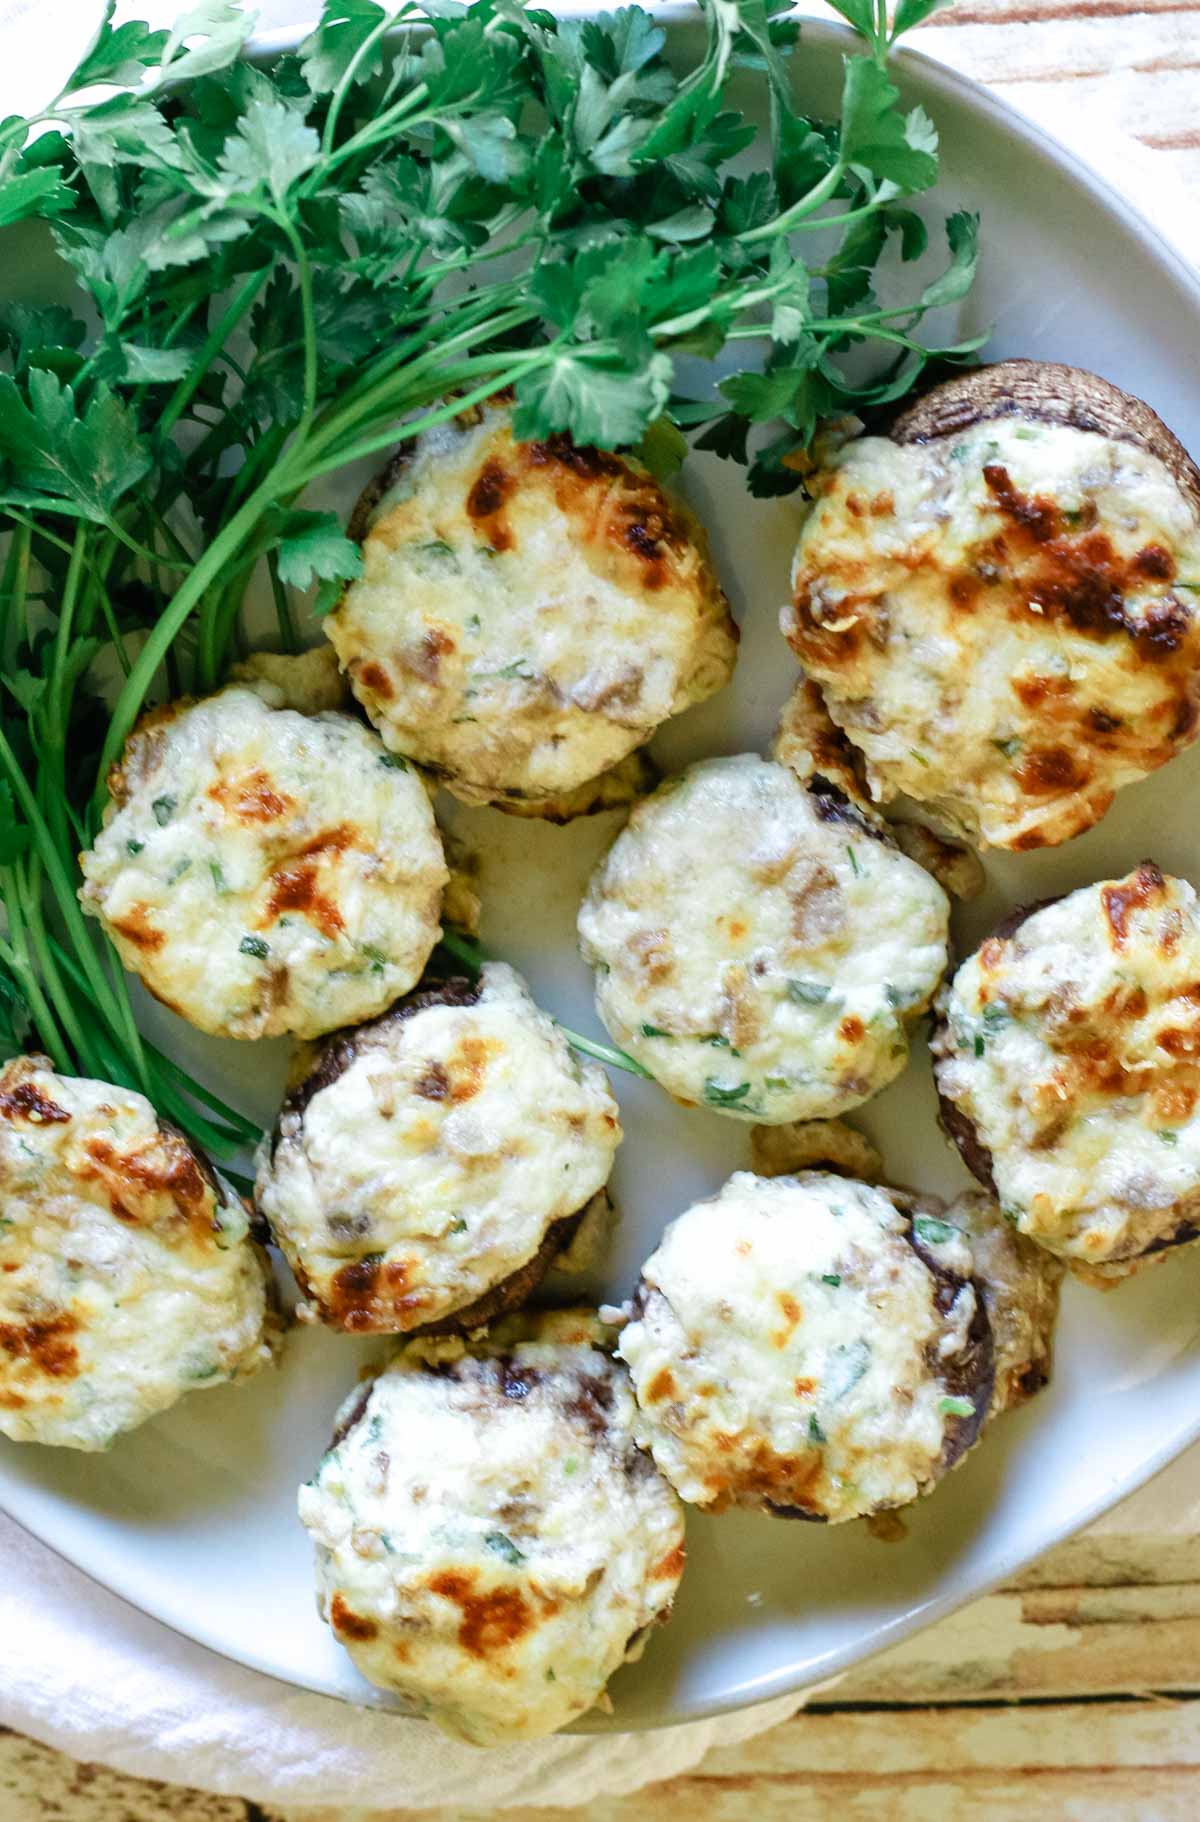 A white plate of cheesy stuffed mushrooms with parsley garnish